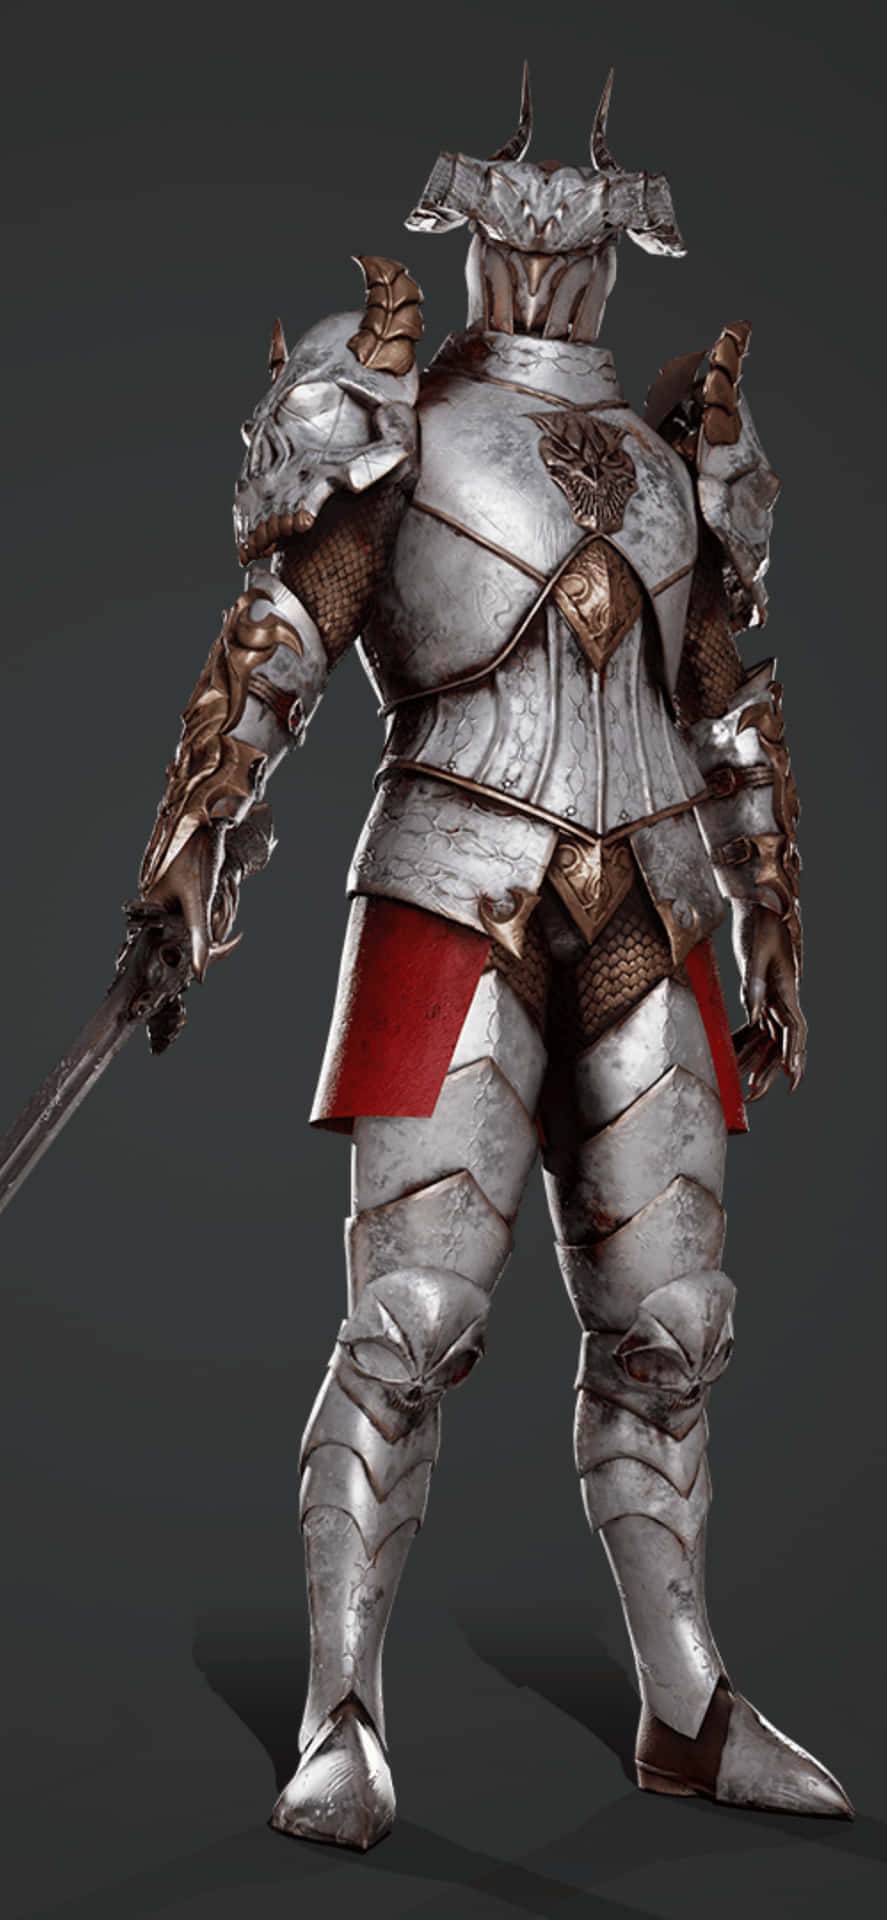 A Knight In Armor With A Sword